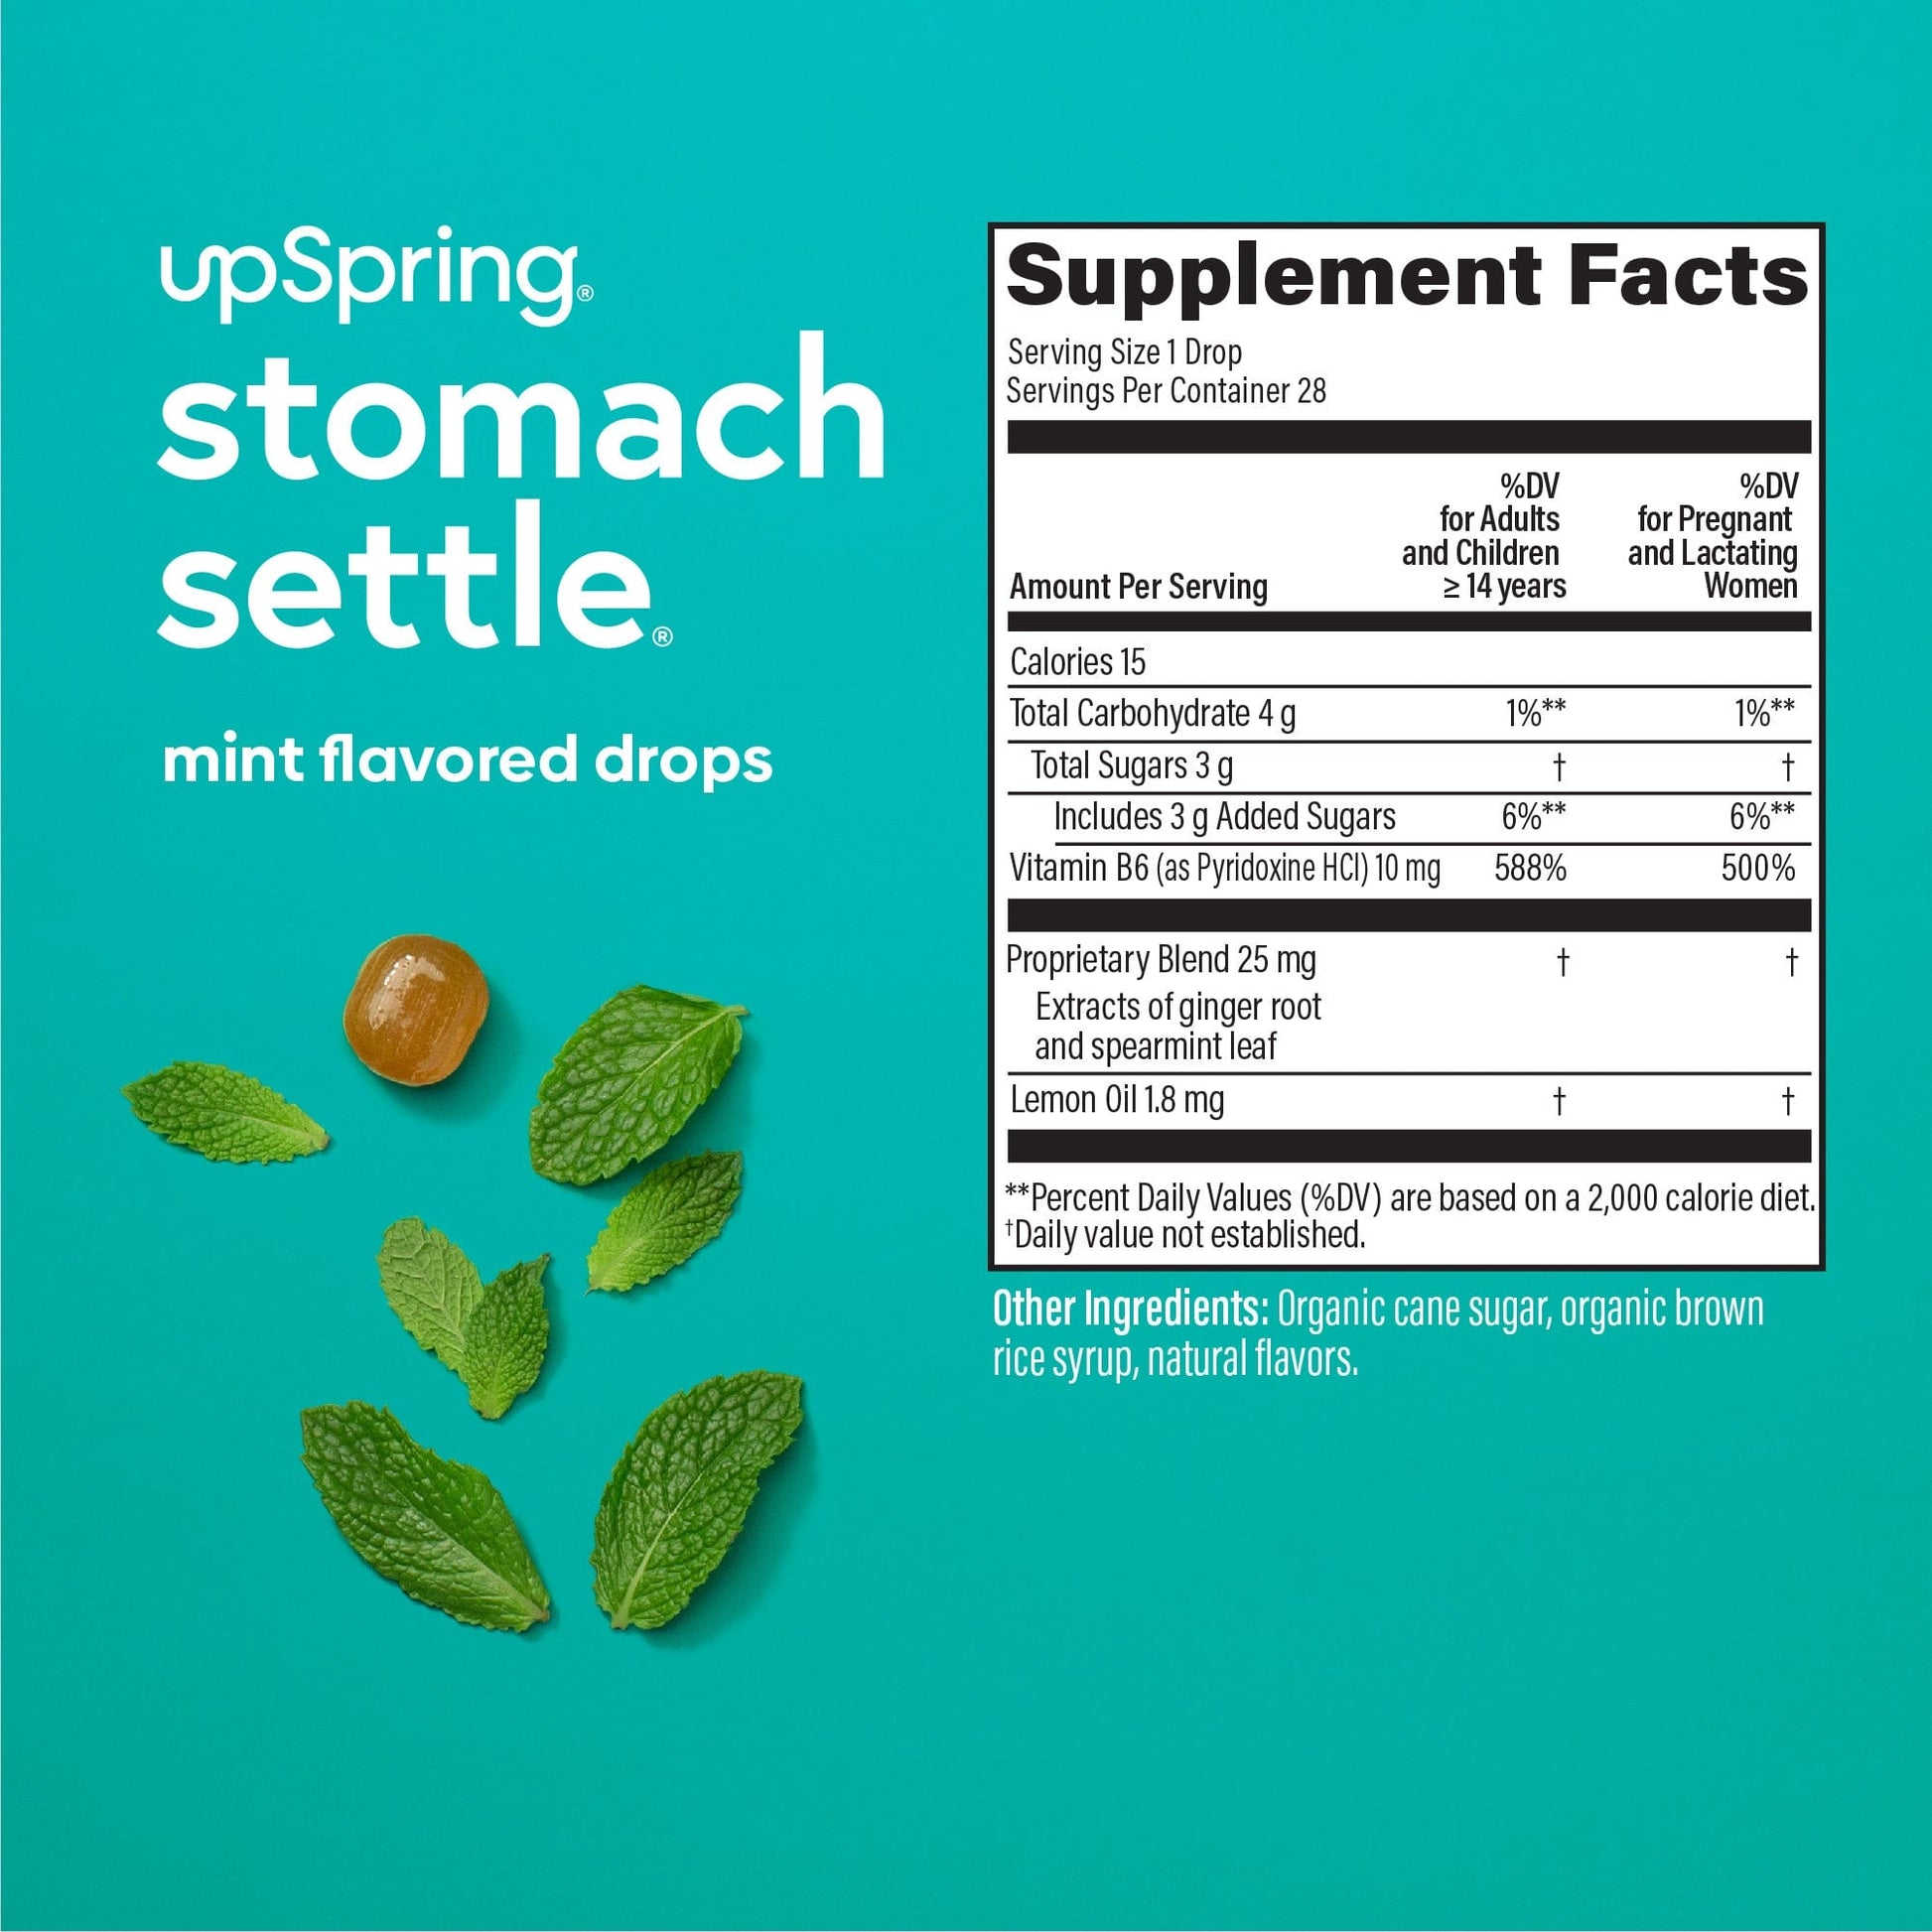 Supplement facts and ingredient information for UpSpring Stomach Settle mint flavor